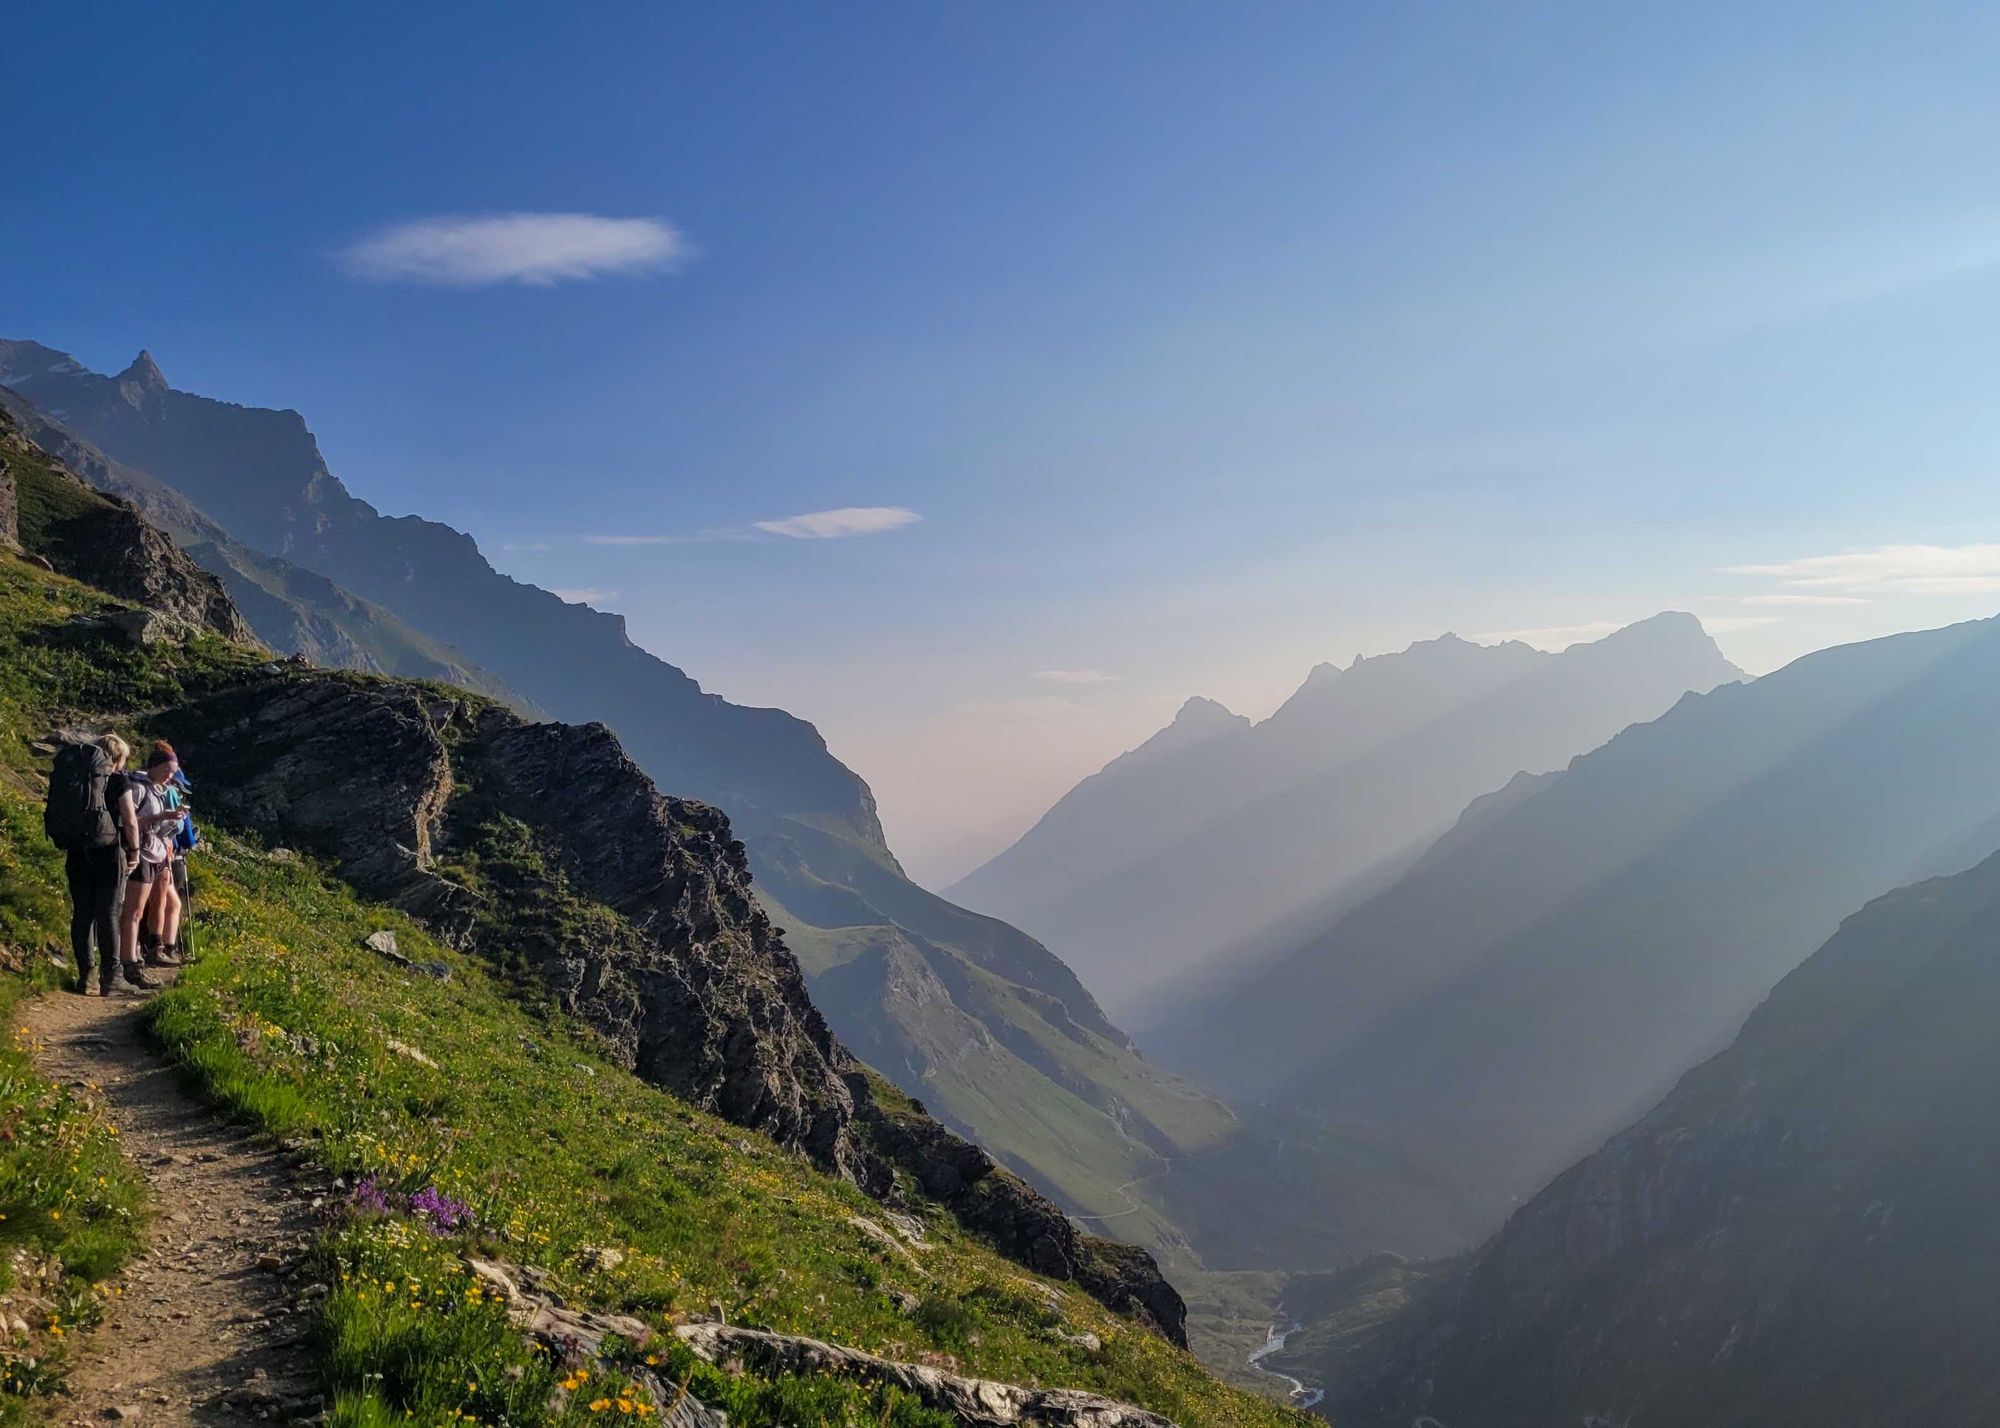 Views from the Val de Rhemes in the Gran Paradiso. Photo: Kirsty Holmes.